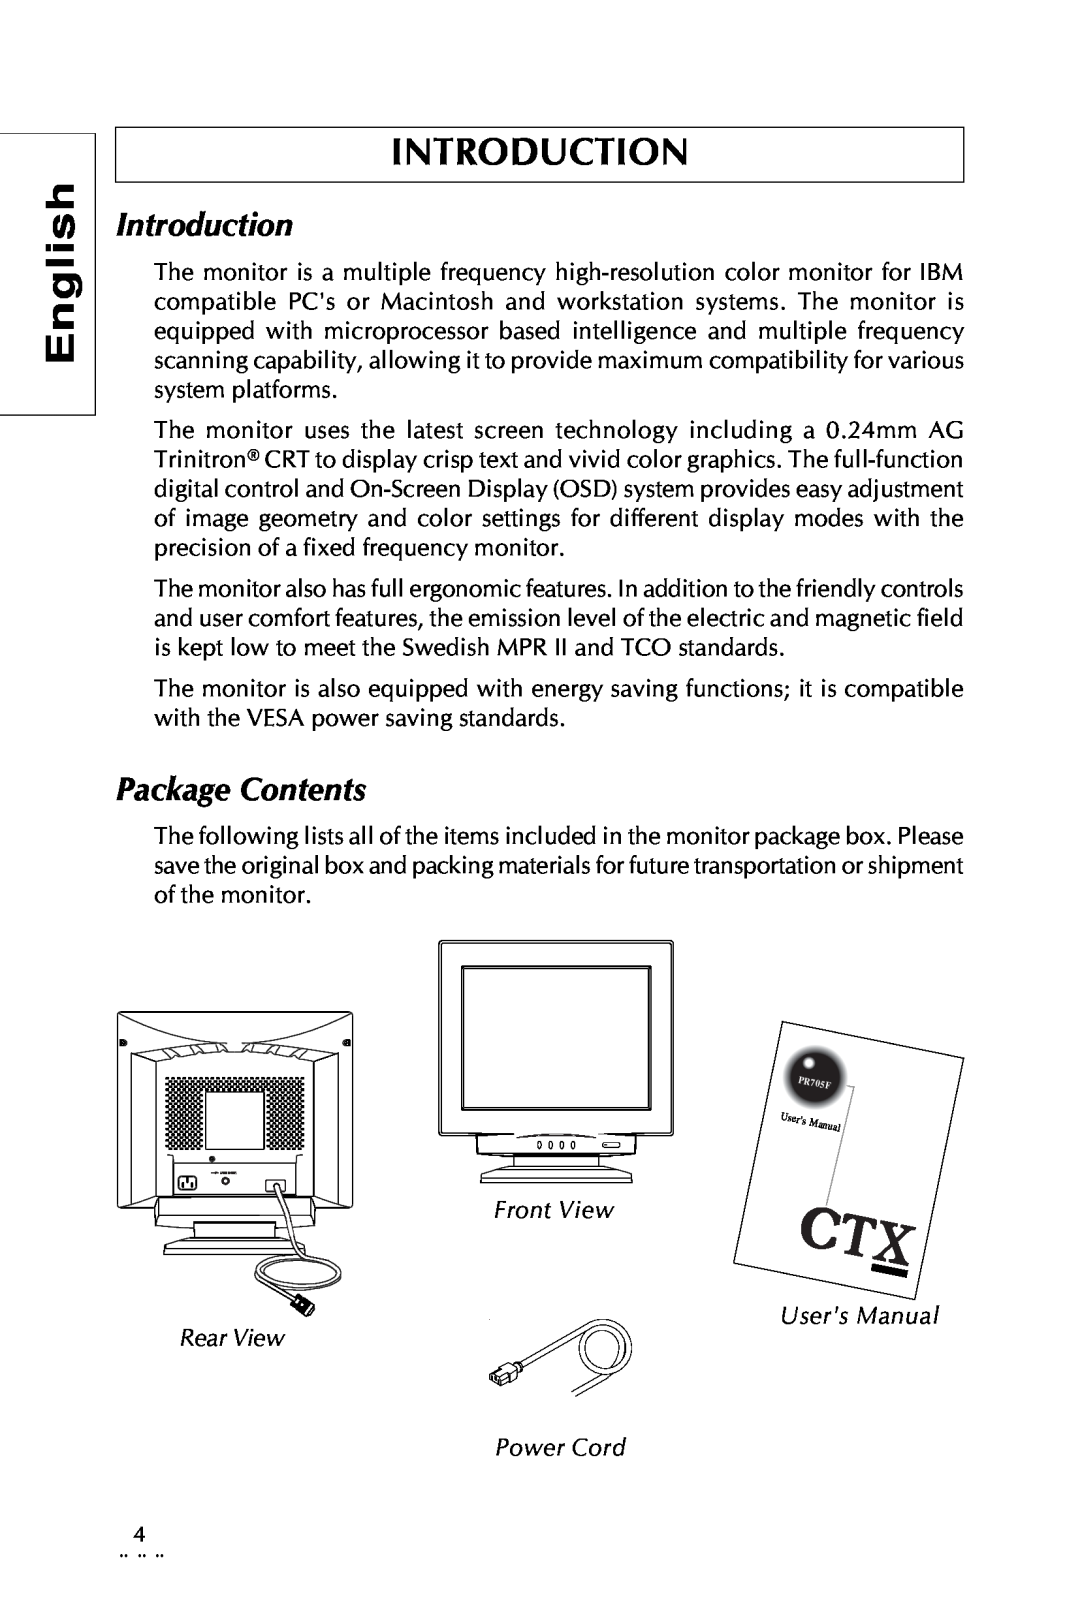 Sony Trinitron CRT Monitor specifications Introduction, Package Contents, English 